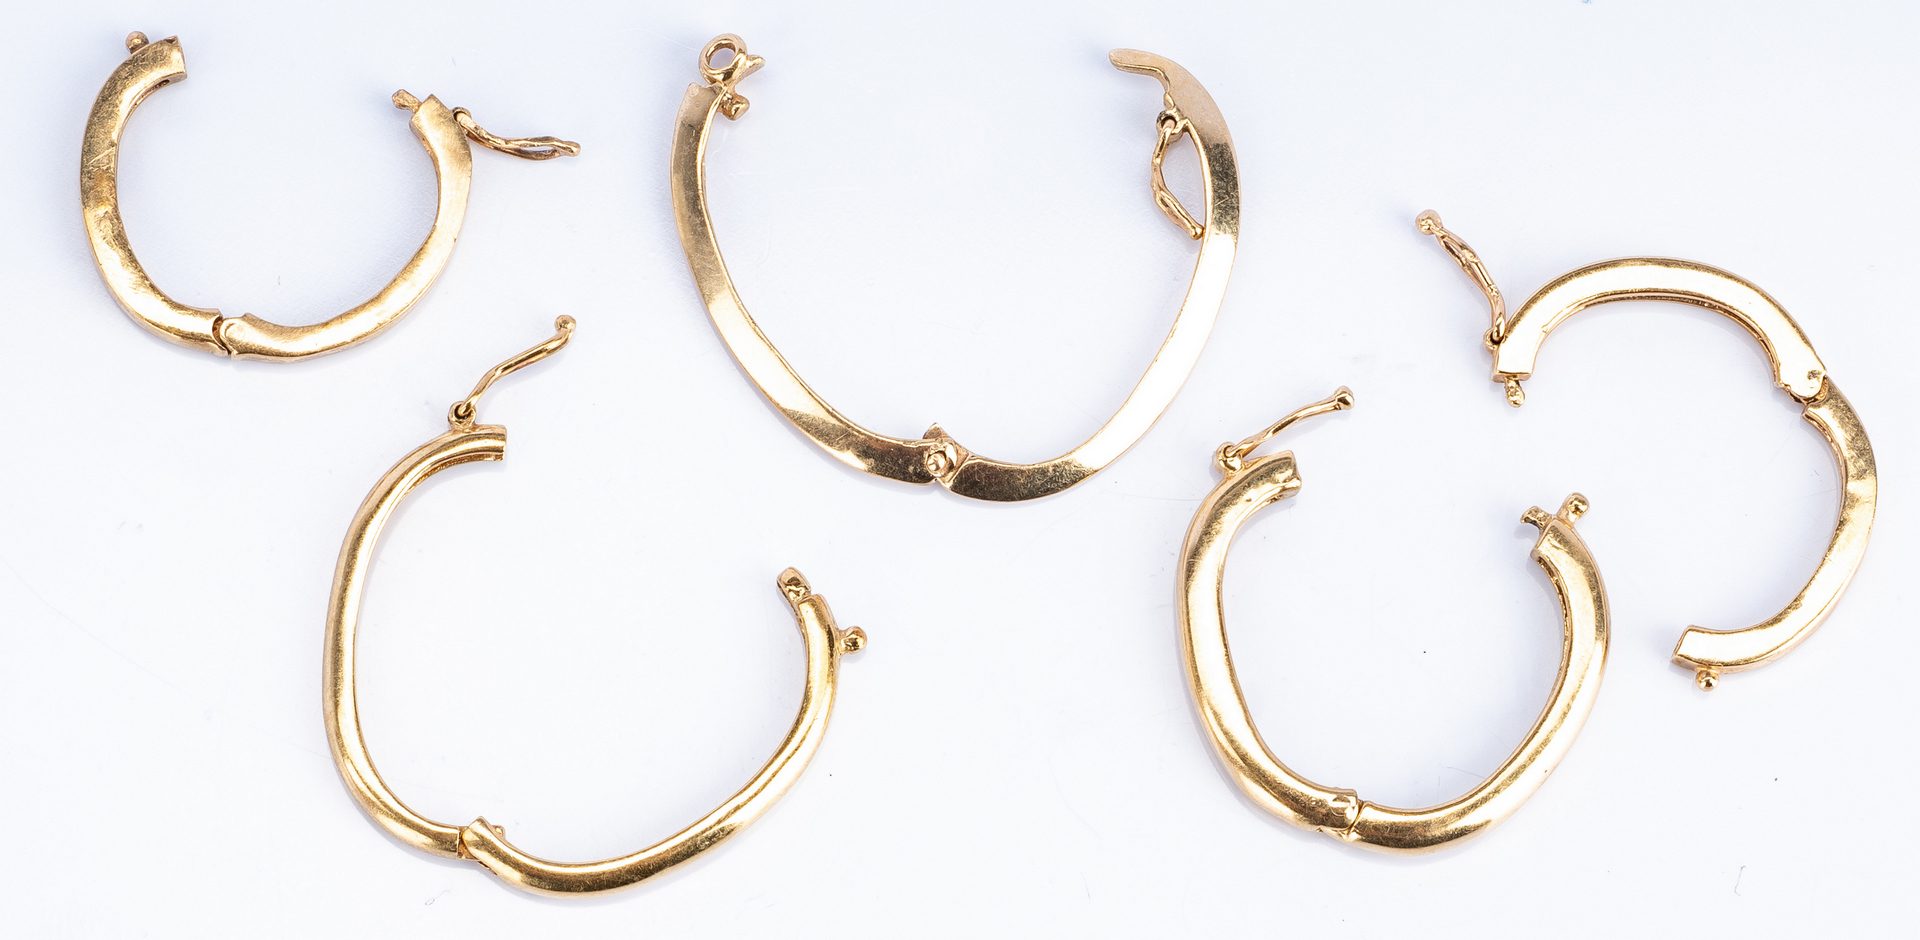 Lot 53: 5 Assorted 14k Gold Necklace Shorteners